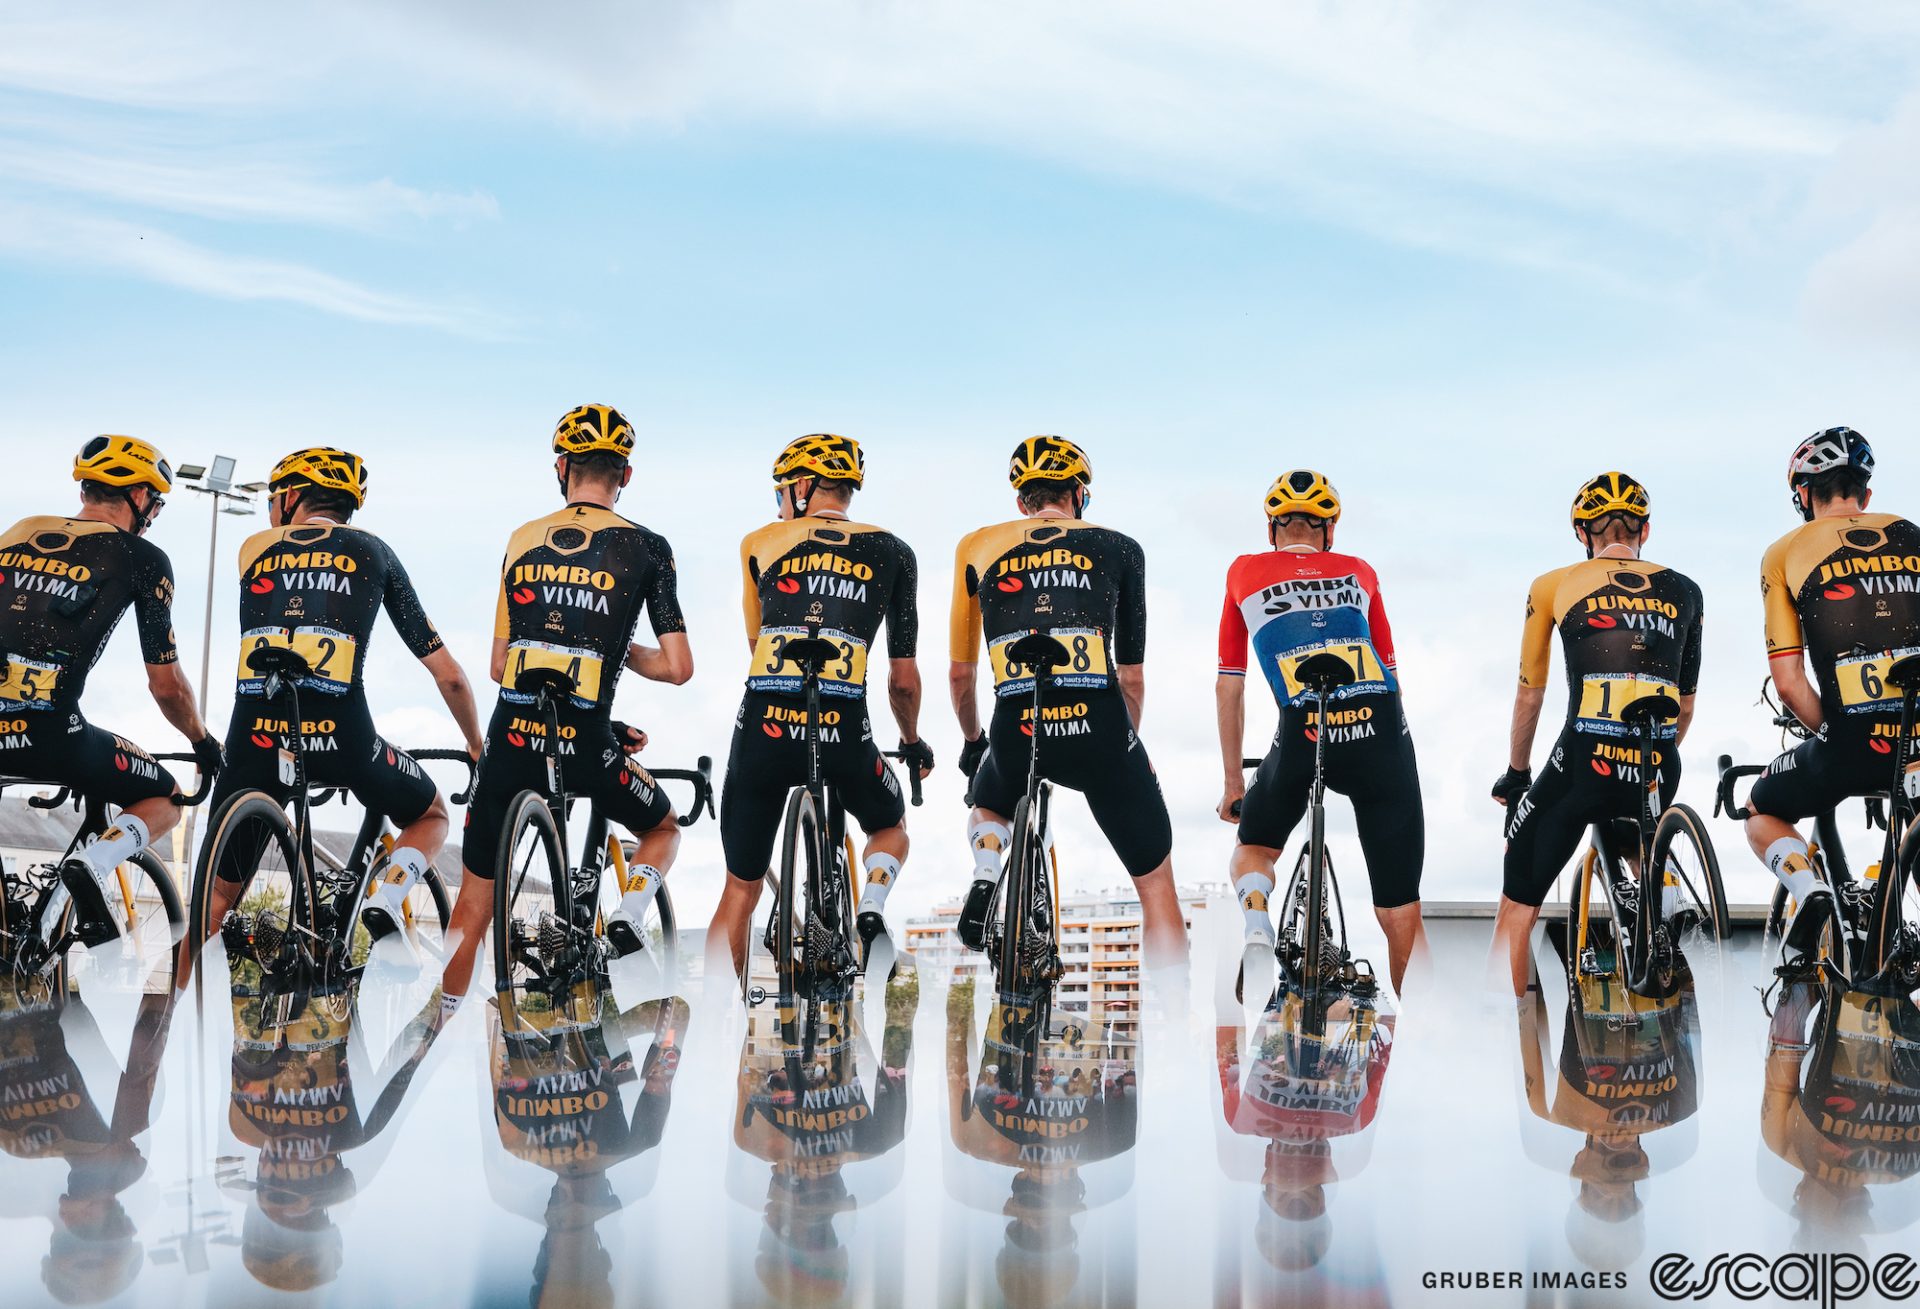 The Jumbo-Visma Tour de France squad at sign-in for a stage. The team is seen from the back, their images reflected in a compositional trick of framing by the photographer. They gaze out over a city with a clear blue sky above them.